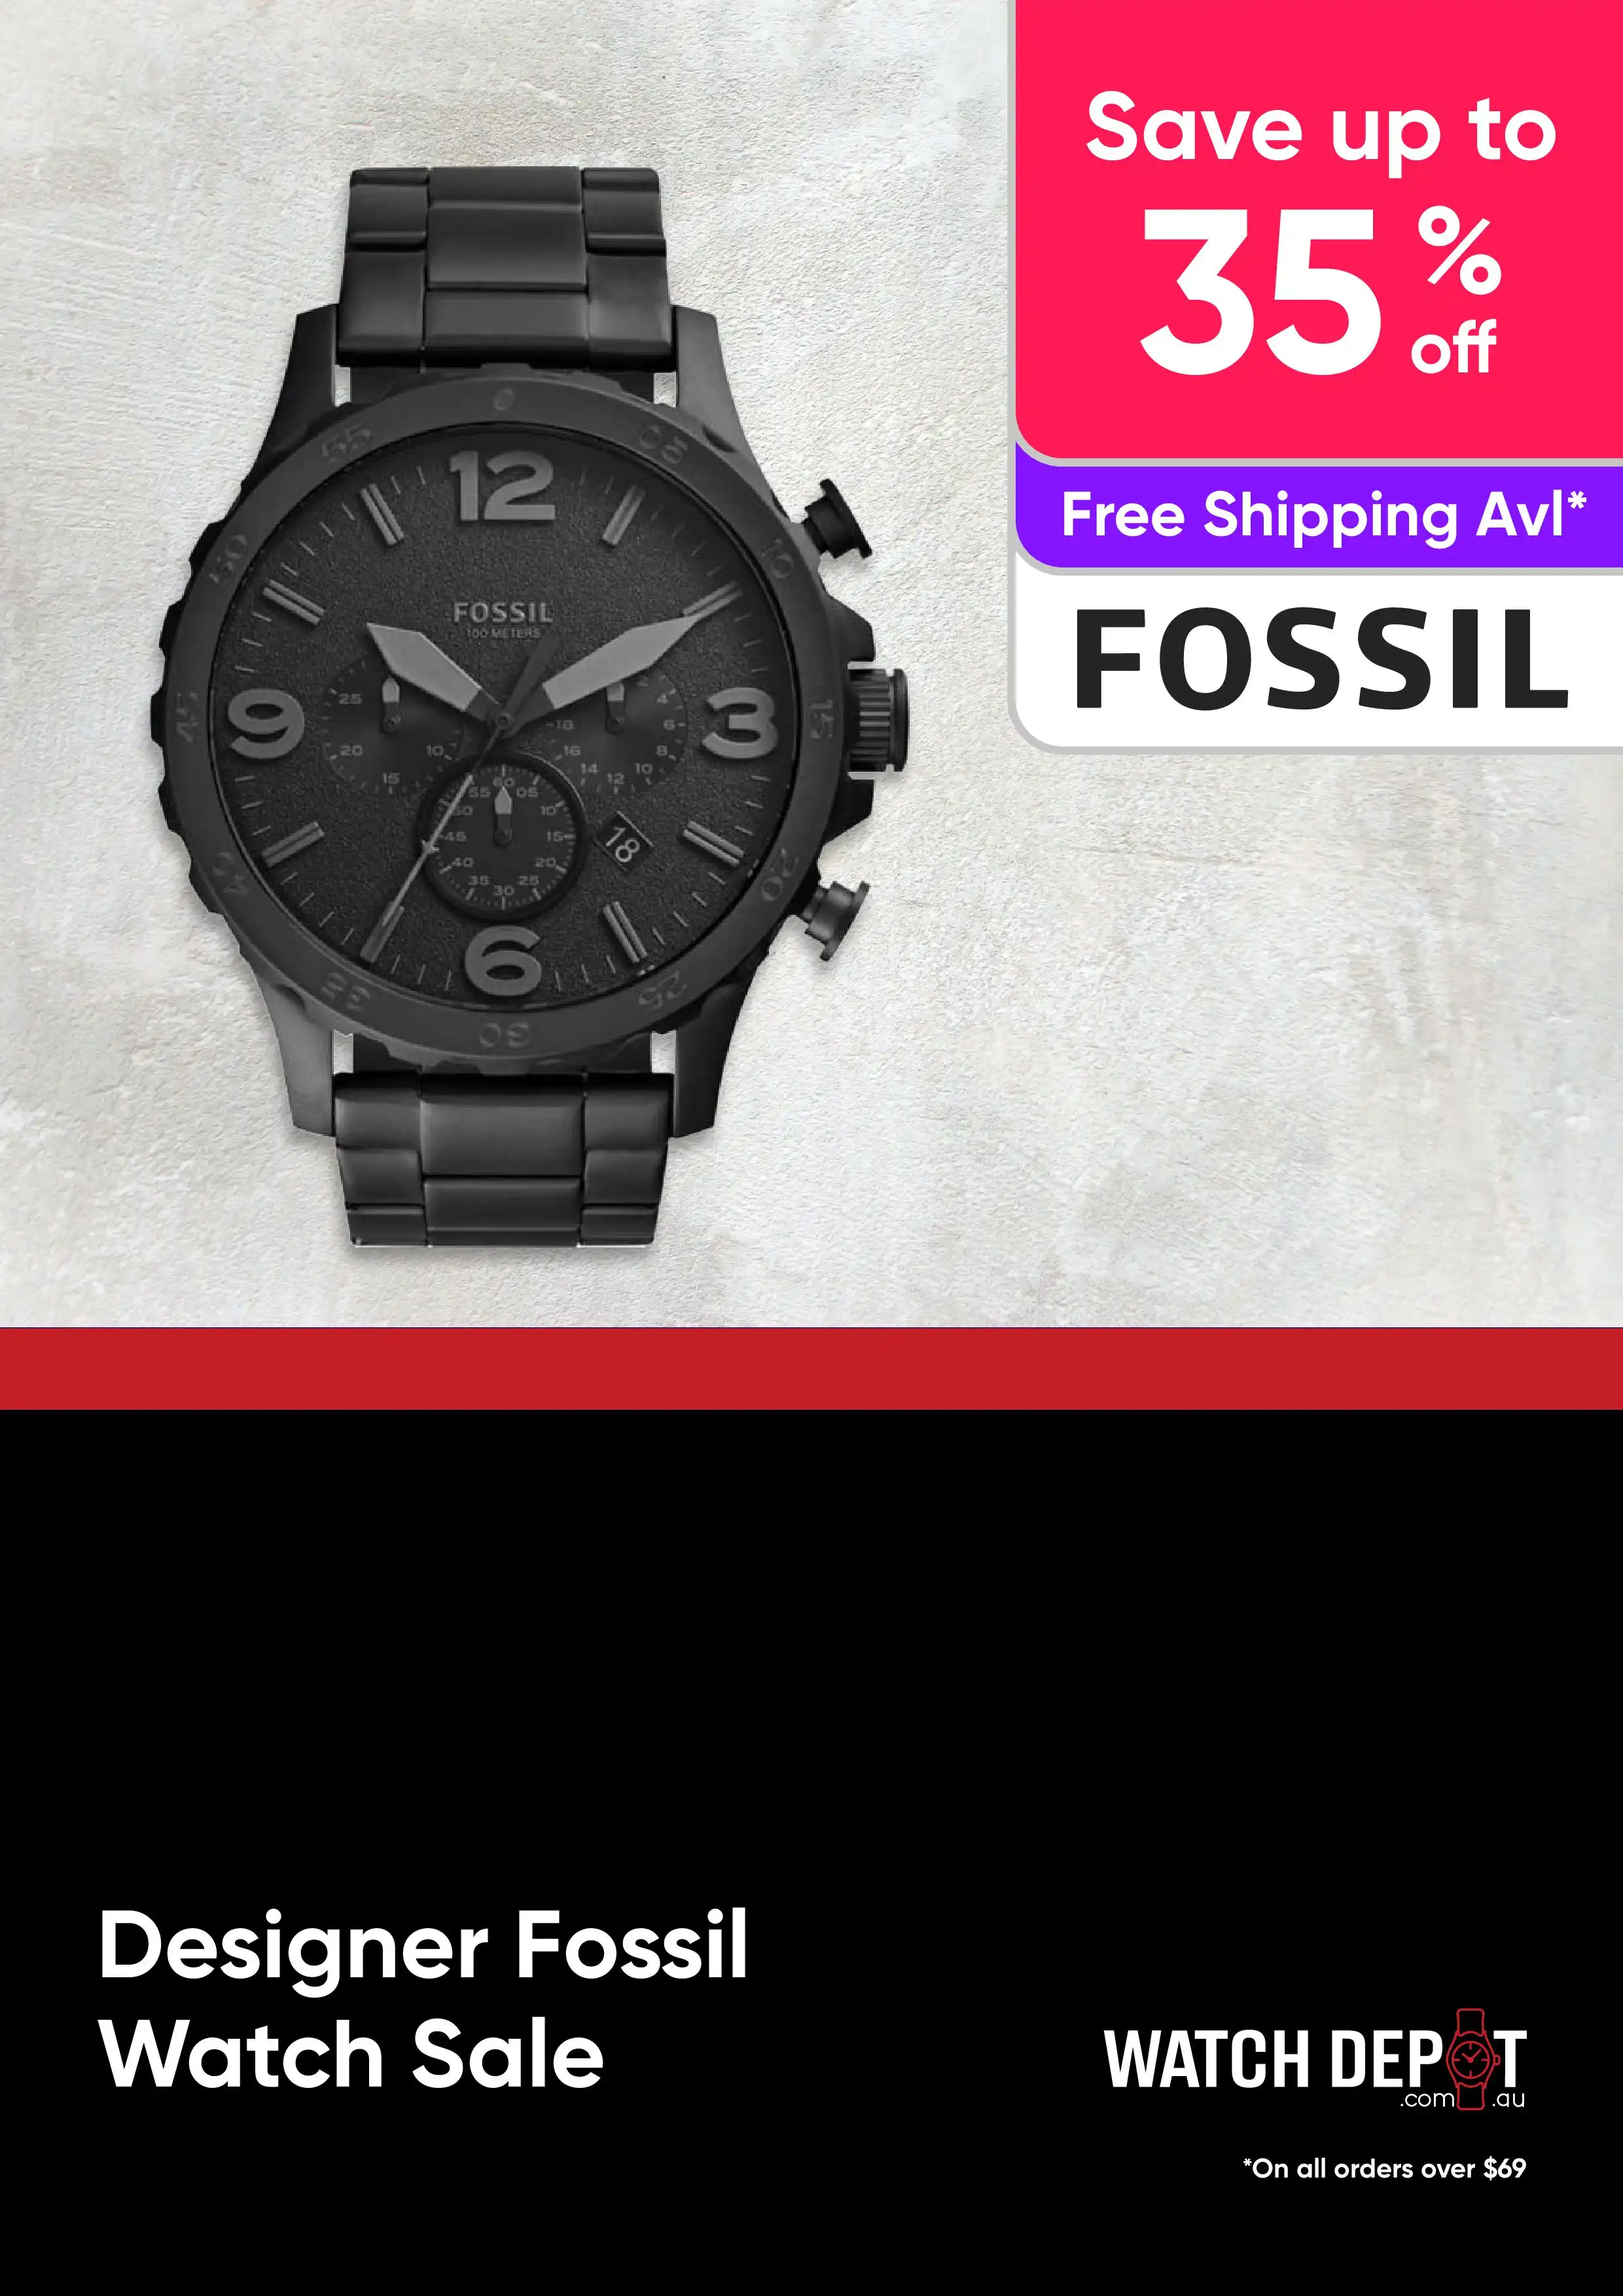 Men's and Women's - Fossil Designer Watch Sale - Up to 35% off